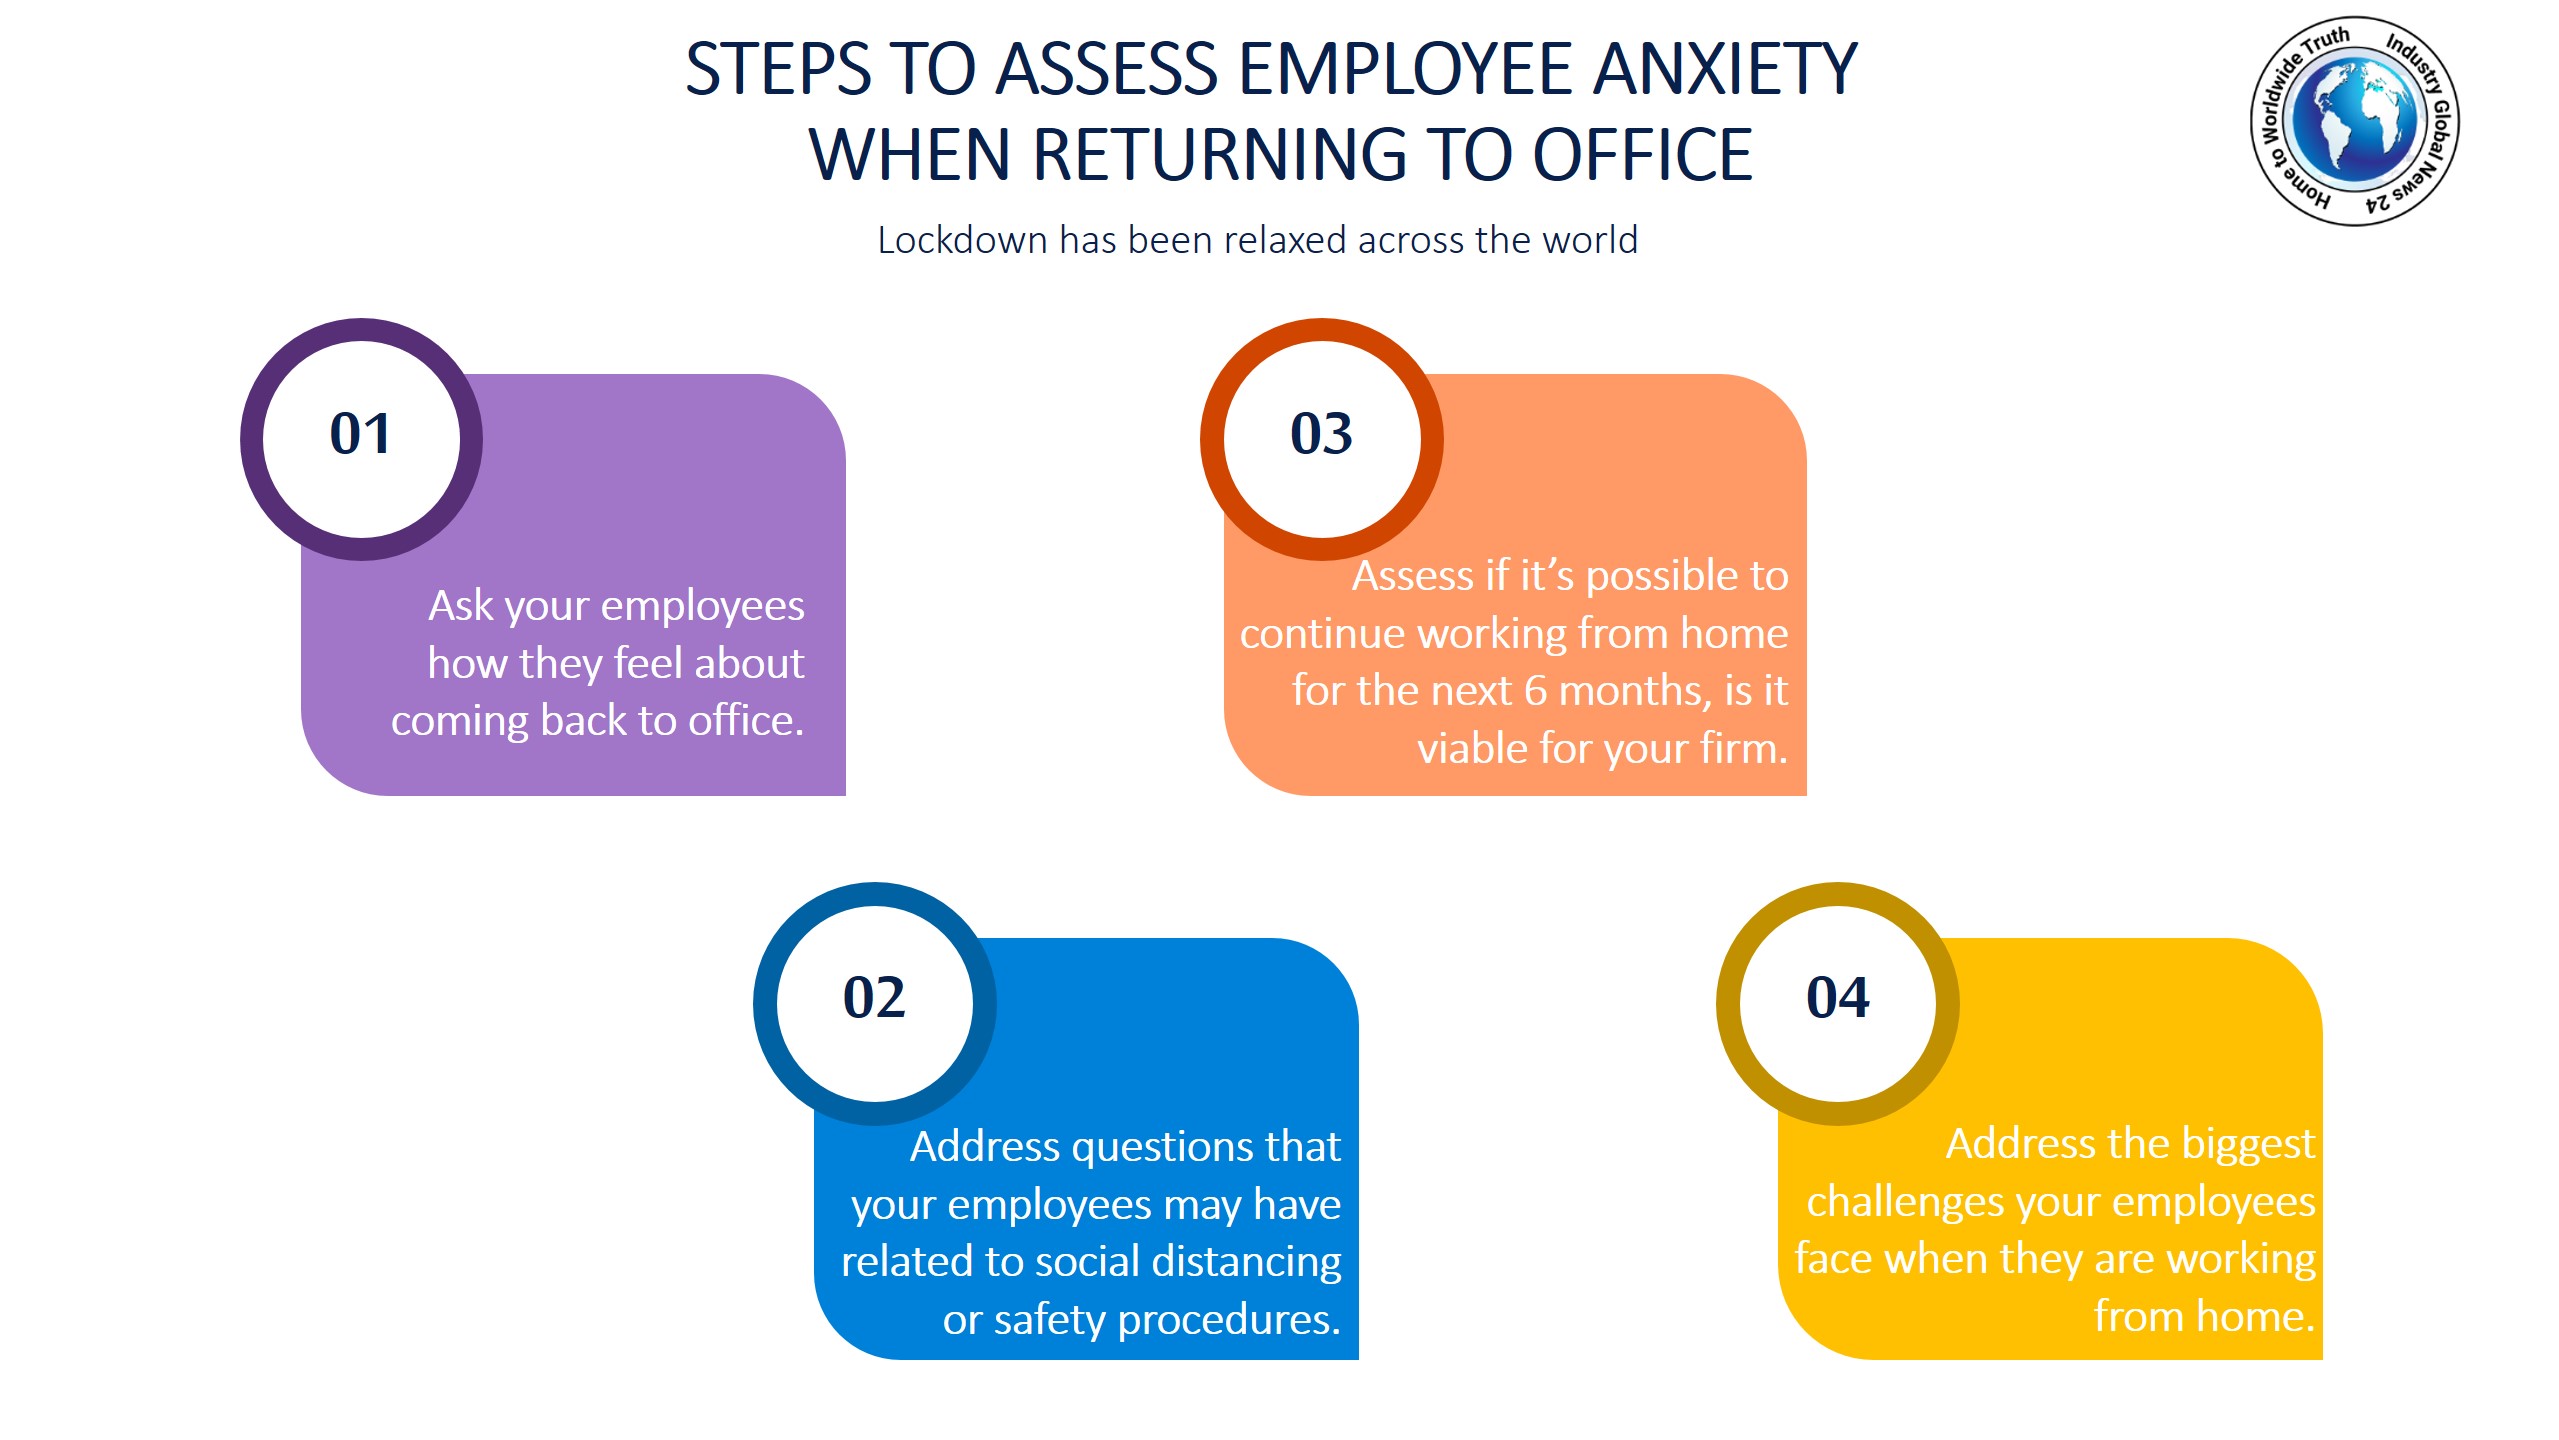 Steps to assess employee anxiety when returning to office